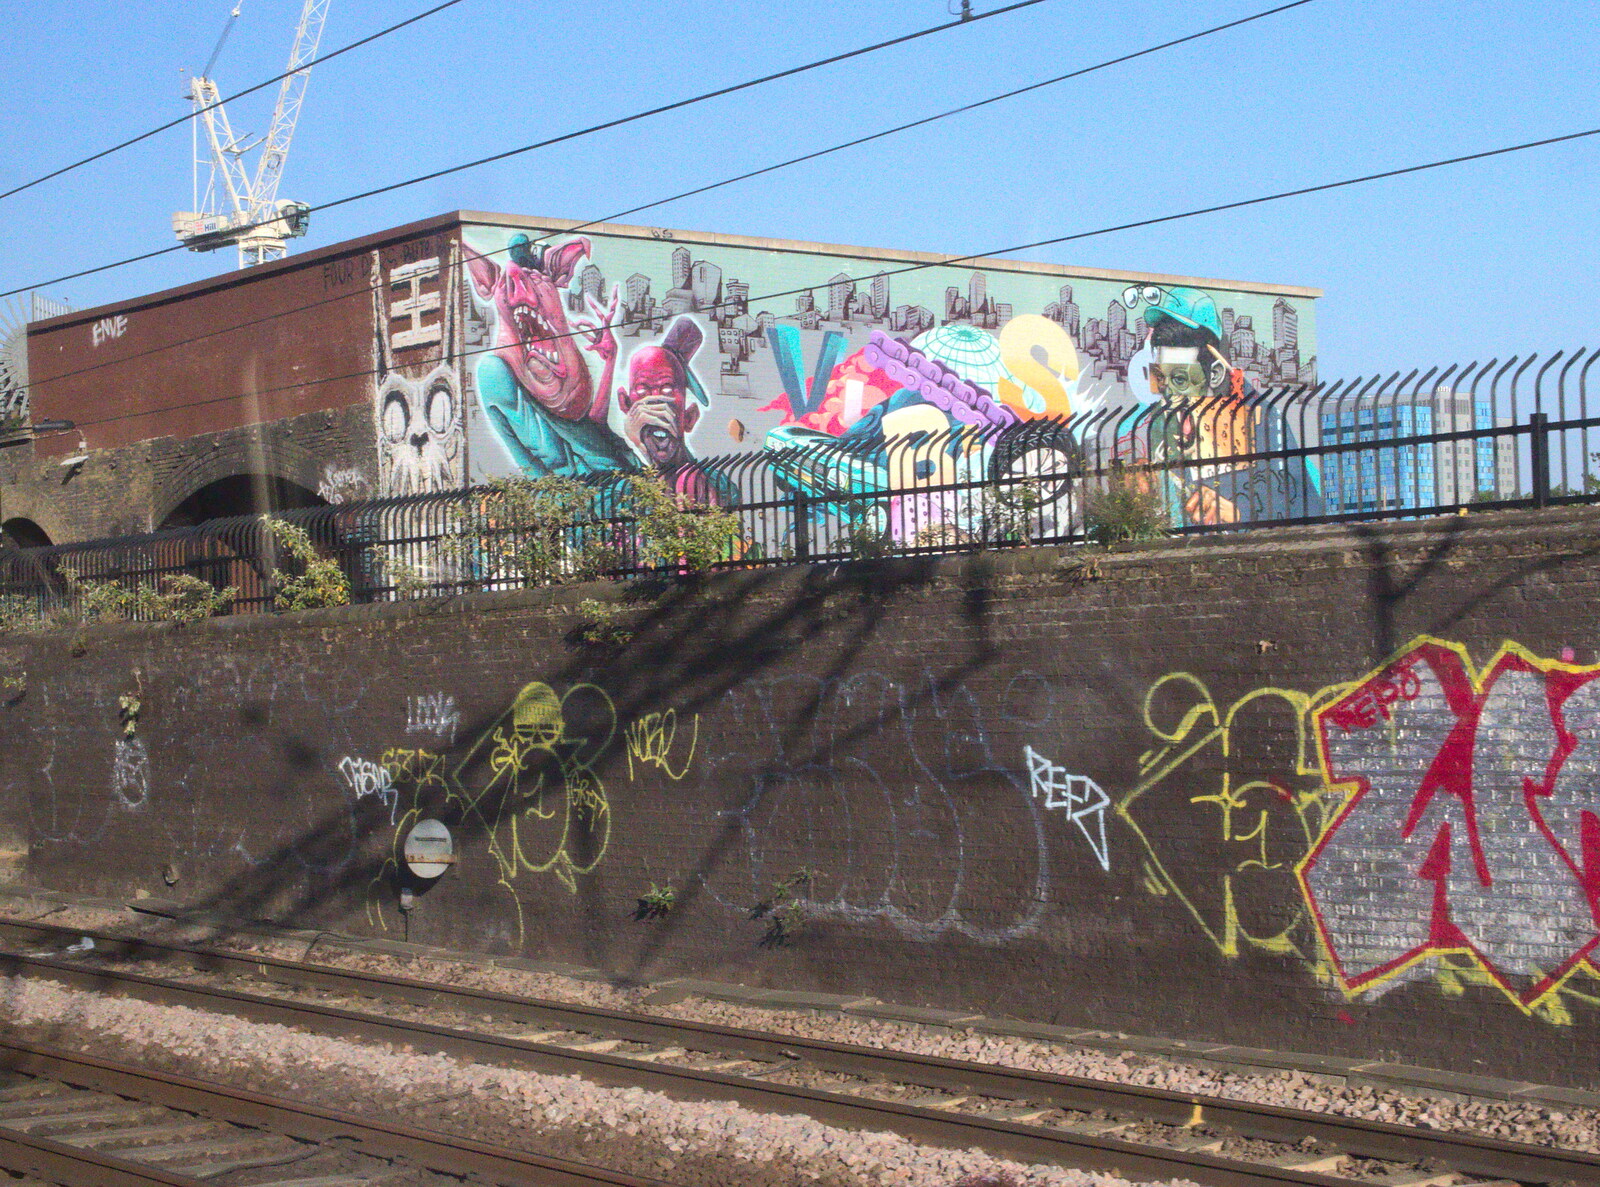 Street art on a building just off Brick Lane from SwiftKey Does AirSoft, Epsom, Surrey - 11th June 2015